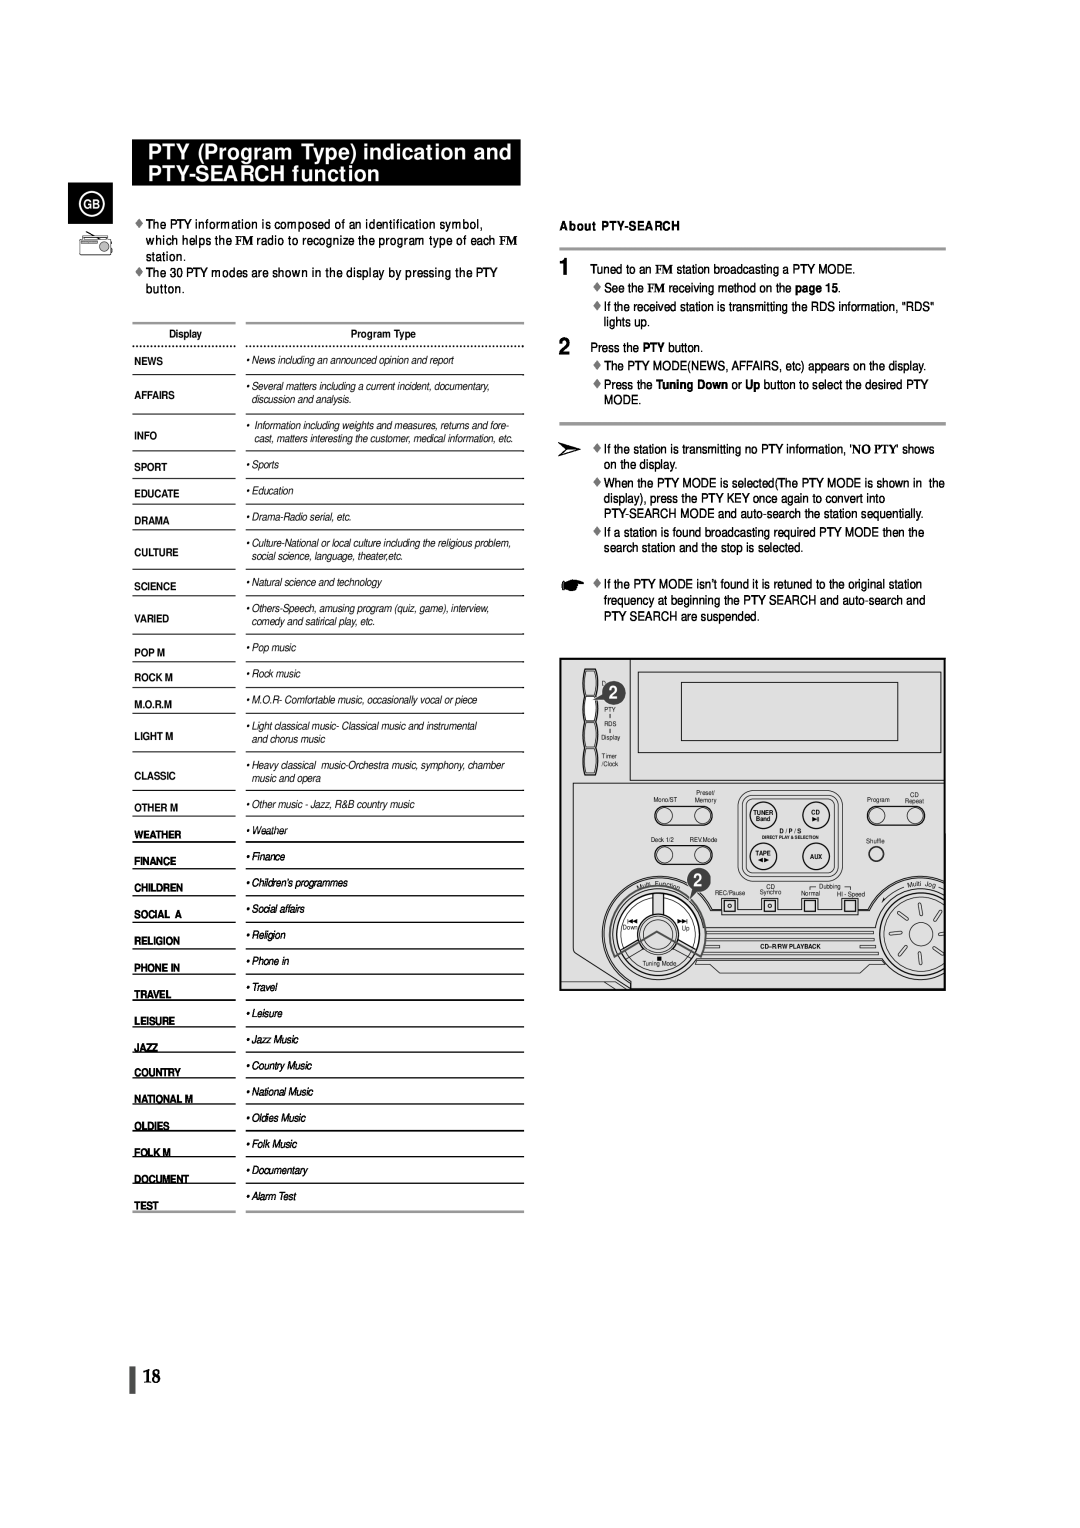 Samsung MAX-ZL65GBR instruction manual PTY Program Type indication and PTY-SEARCH function, About PTY-SEARCH 